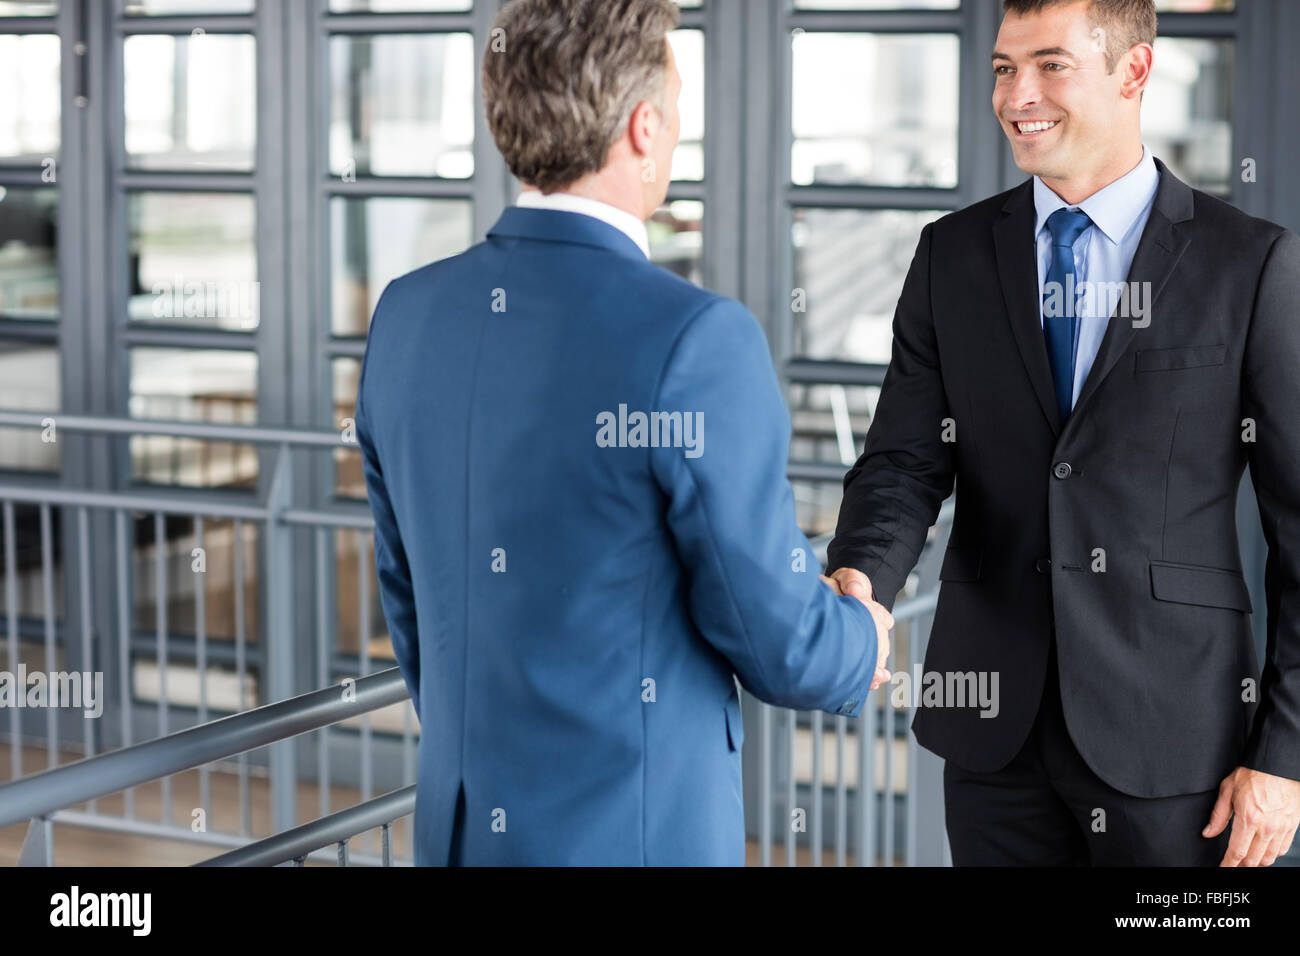 Two smiling businessmen shaking hands Stock Photo